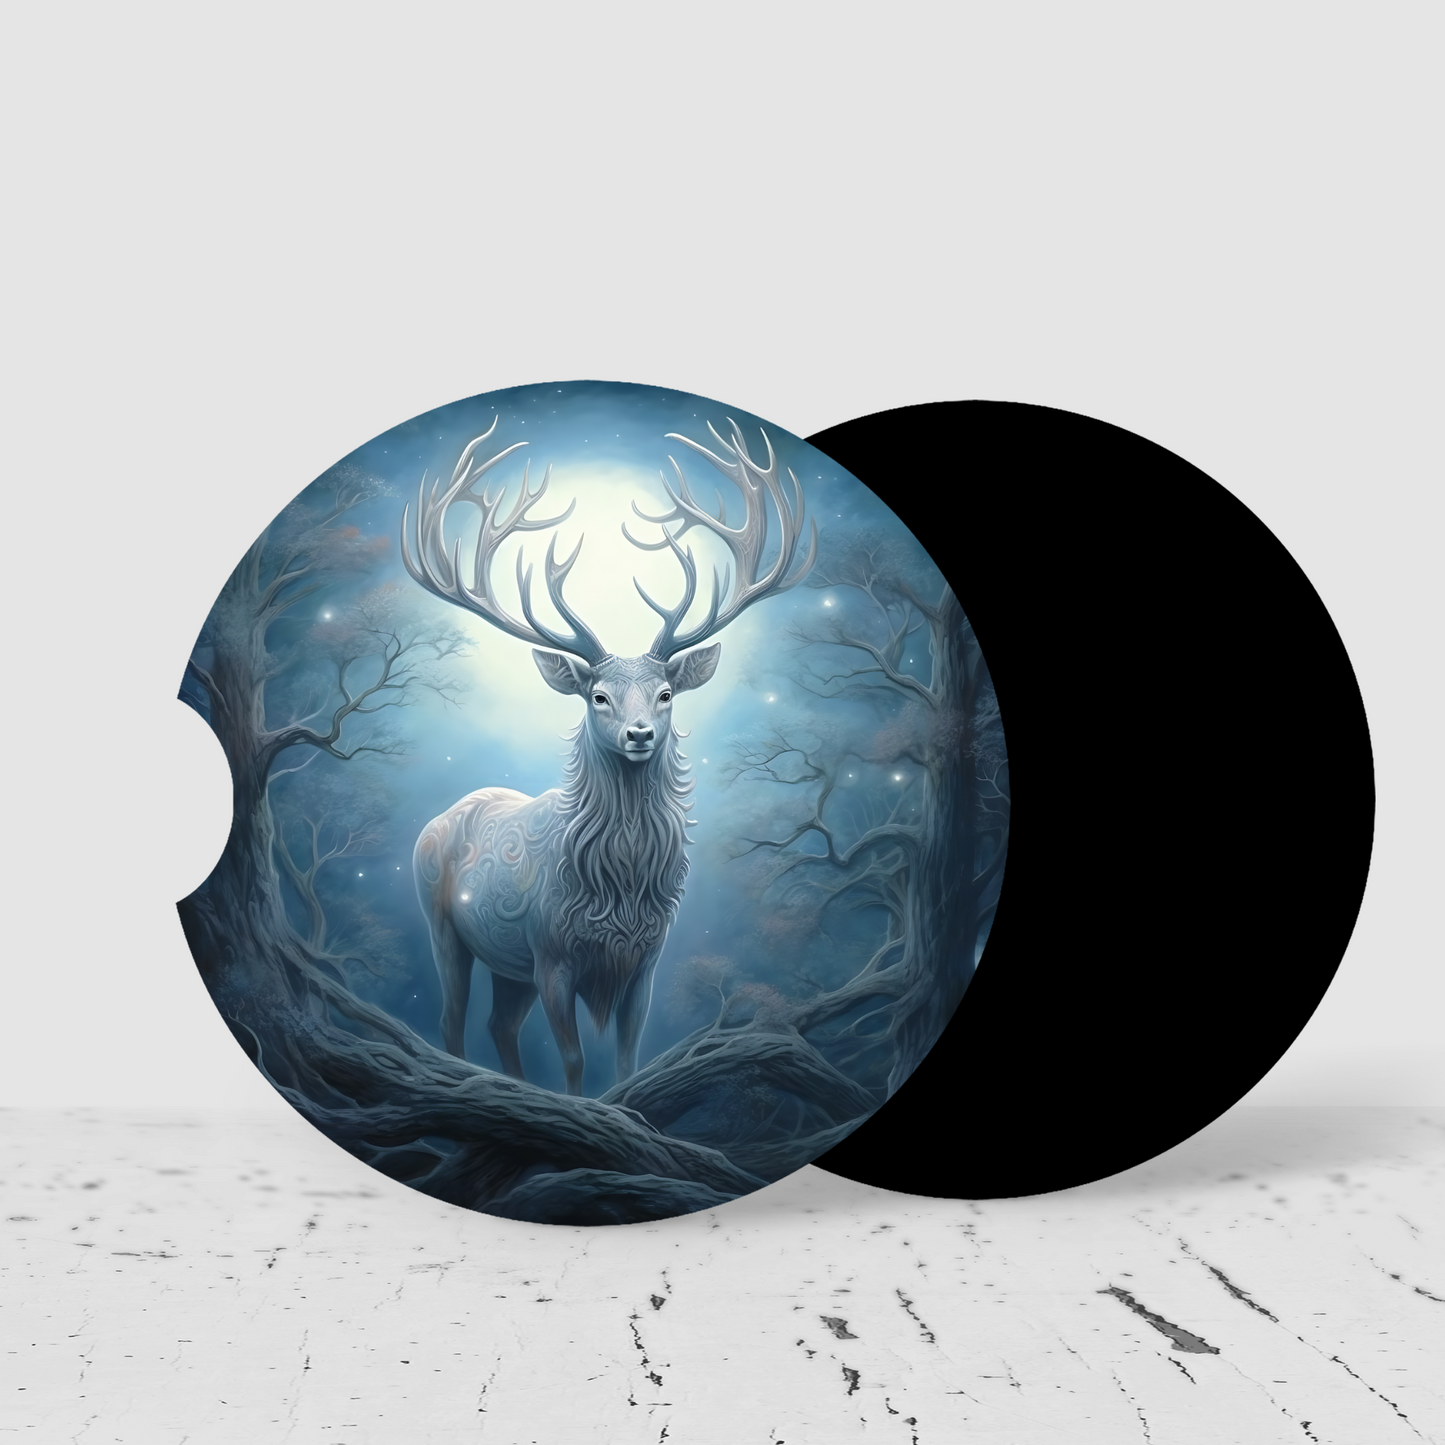 Premium Neoprene Car Coasters | Drink Holders for Your Car Console - Set of 2 Enchanted Stag Design